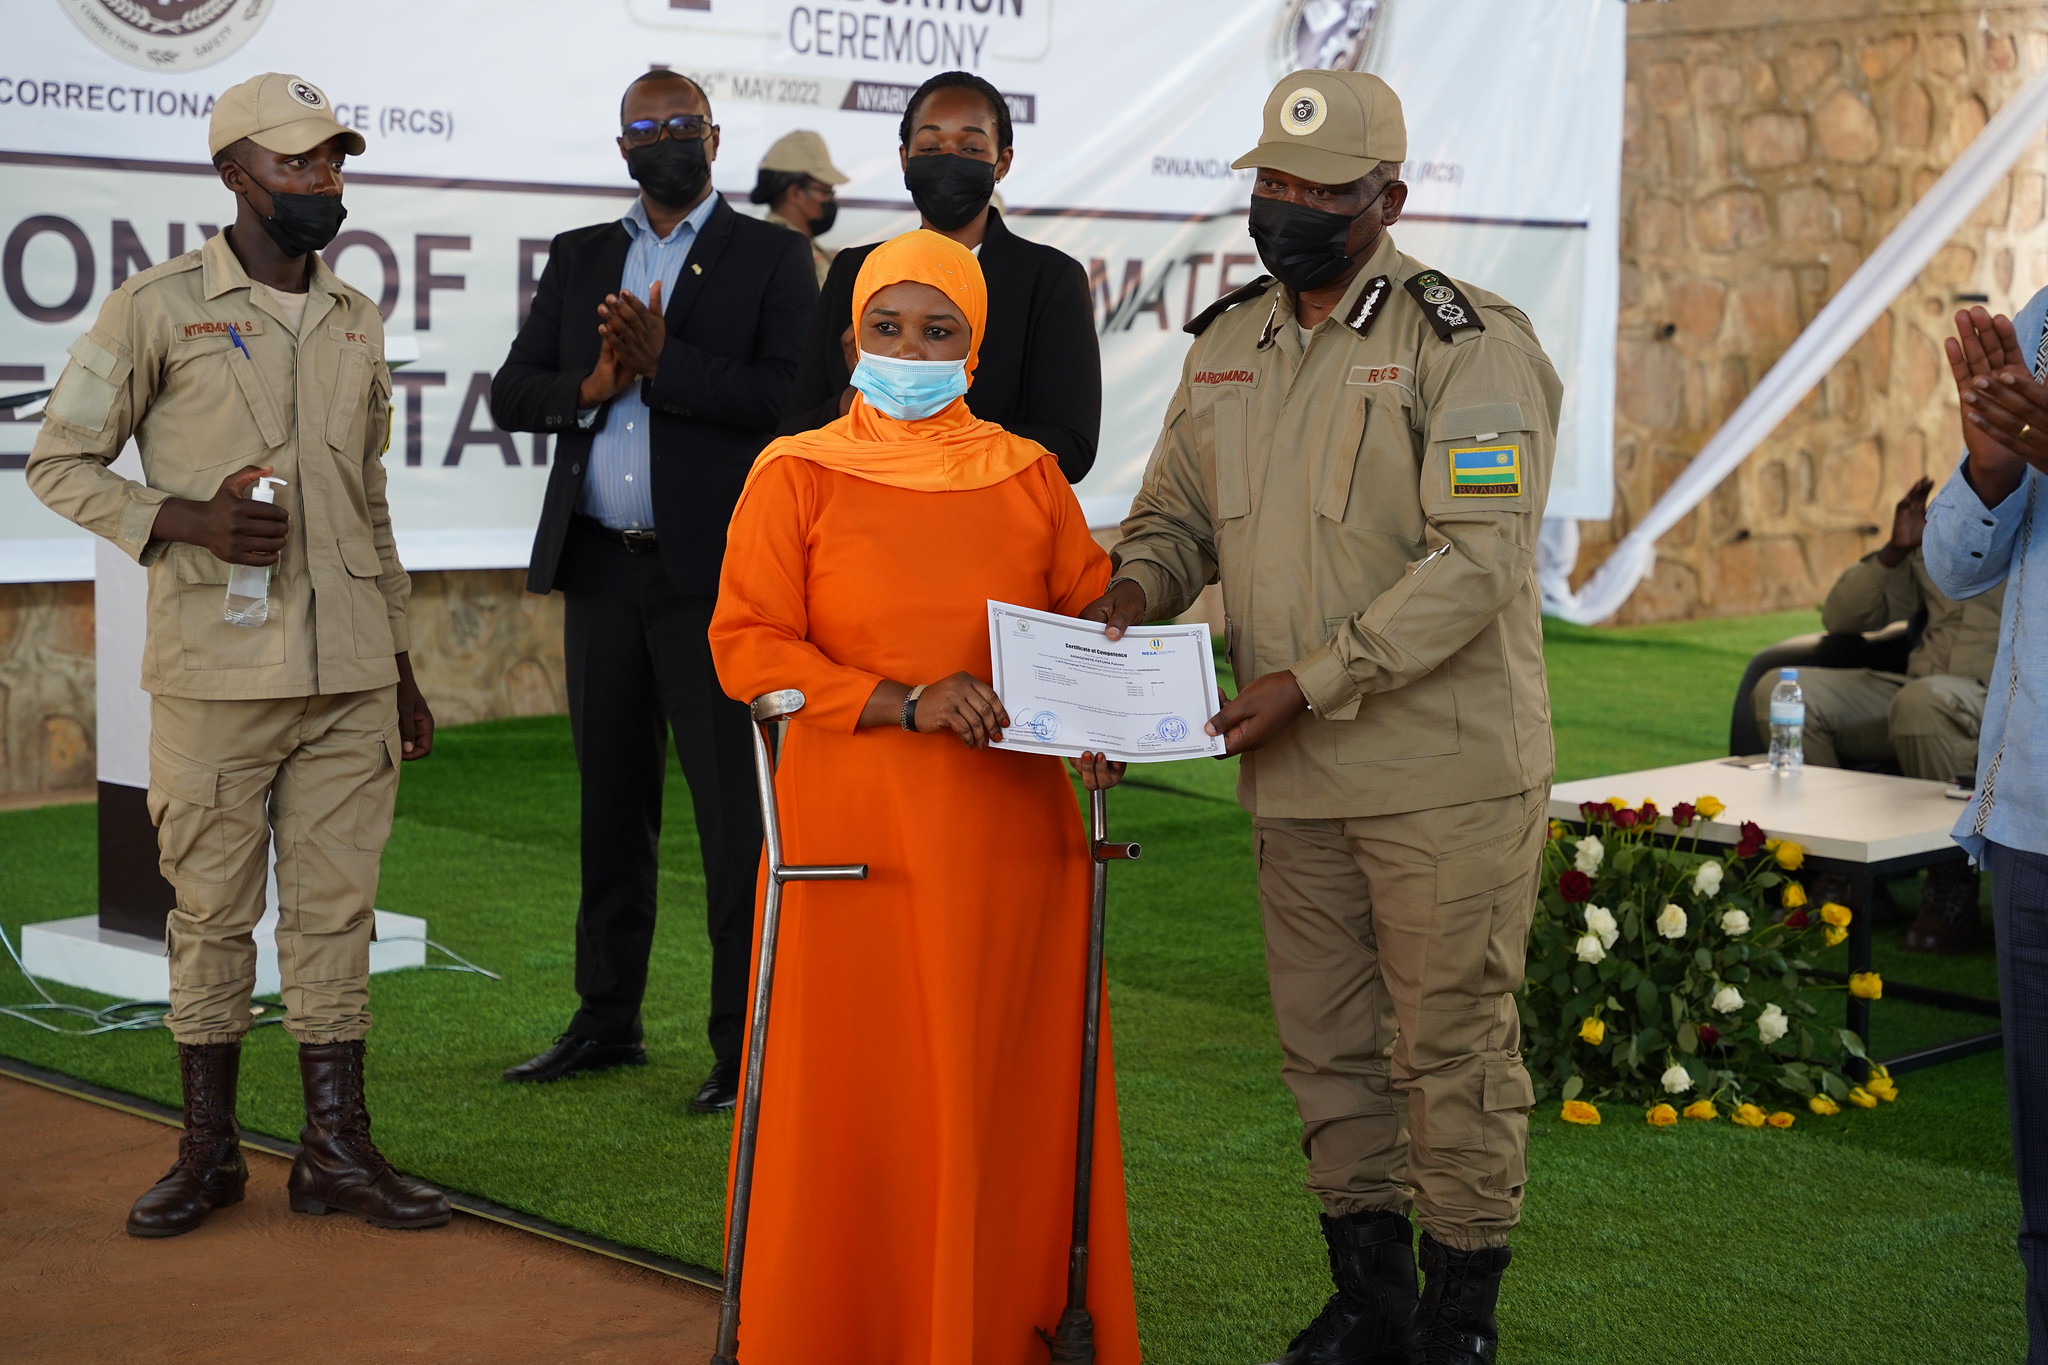 One of inmates trainees who graduated at RCS TVET Center at Mageragere on May 26. Seen here recieves her certificate during the graduation ceremony. All Photos by Craish Bahizi